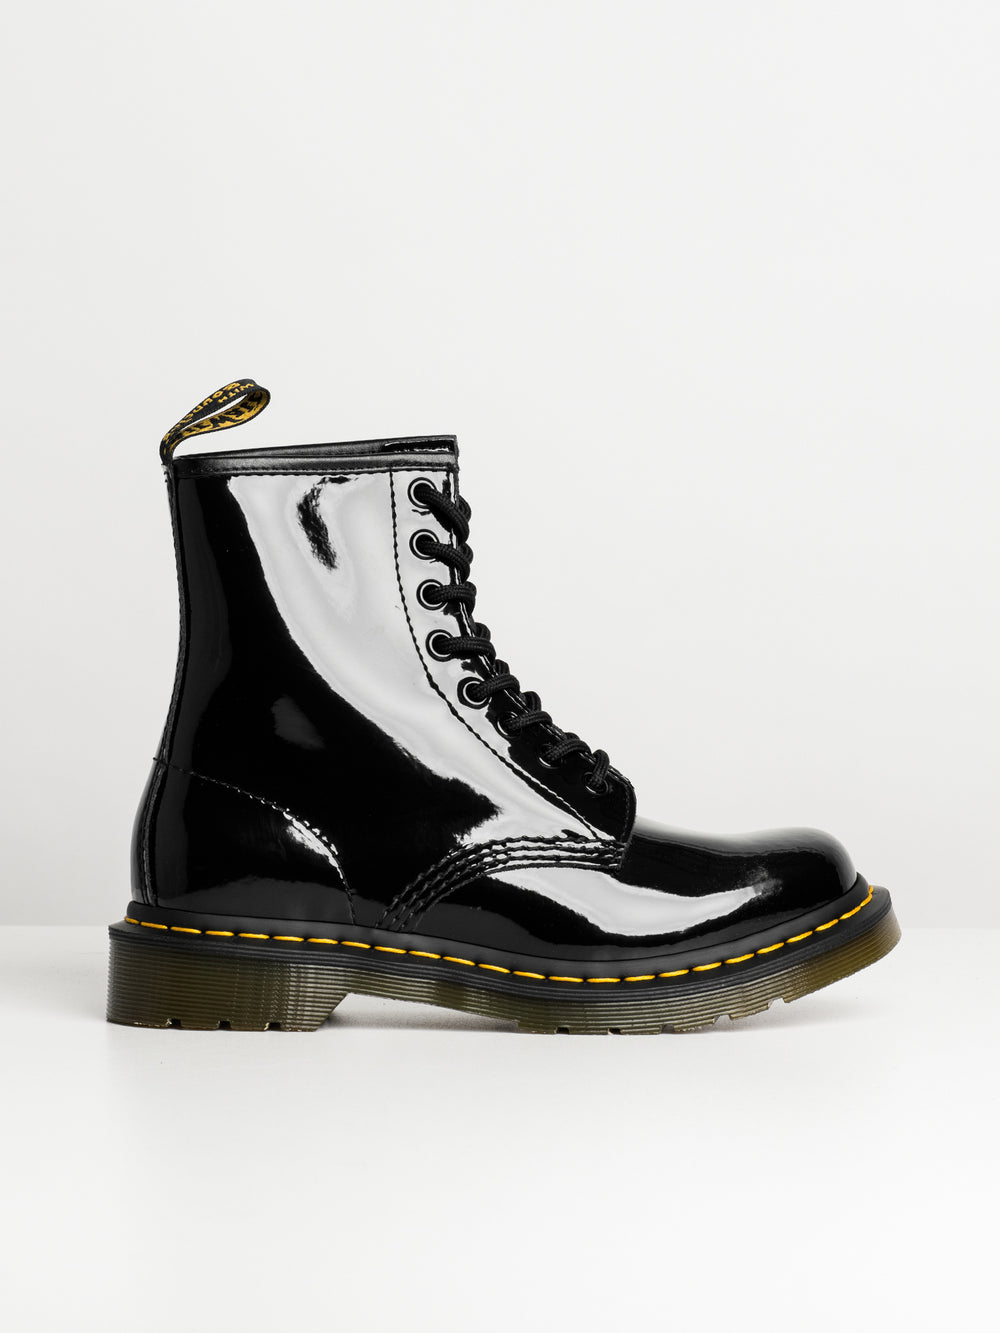 WOMENS DR MARTENS 1460 PATENT BOOT - CLEARANCE